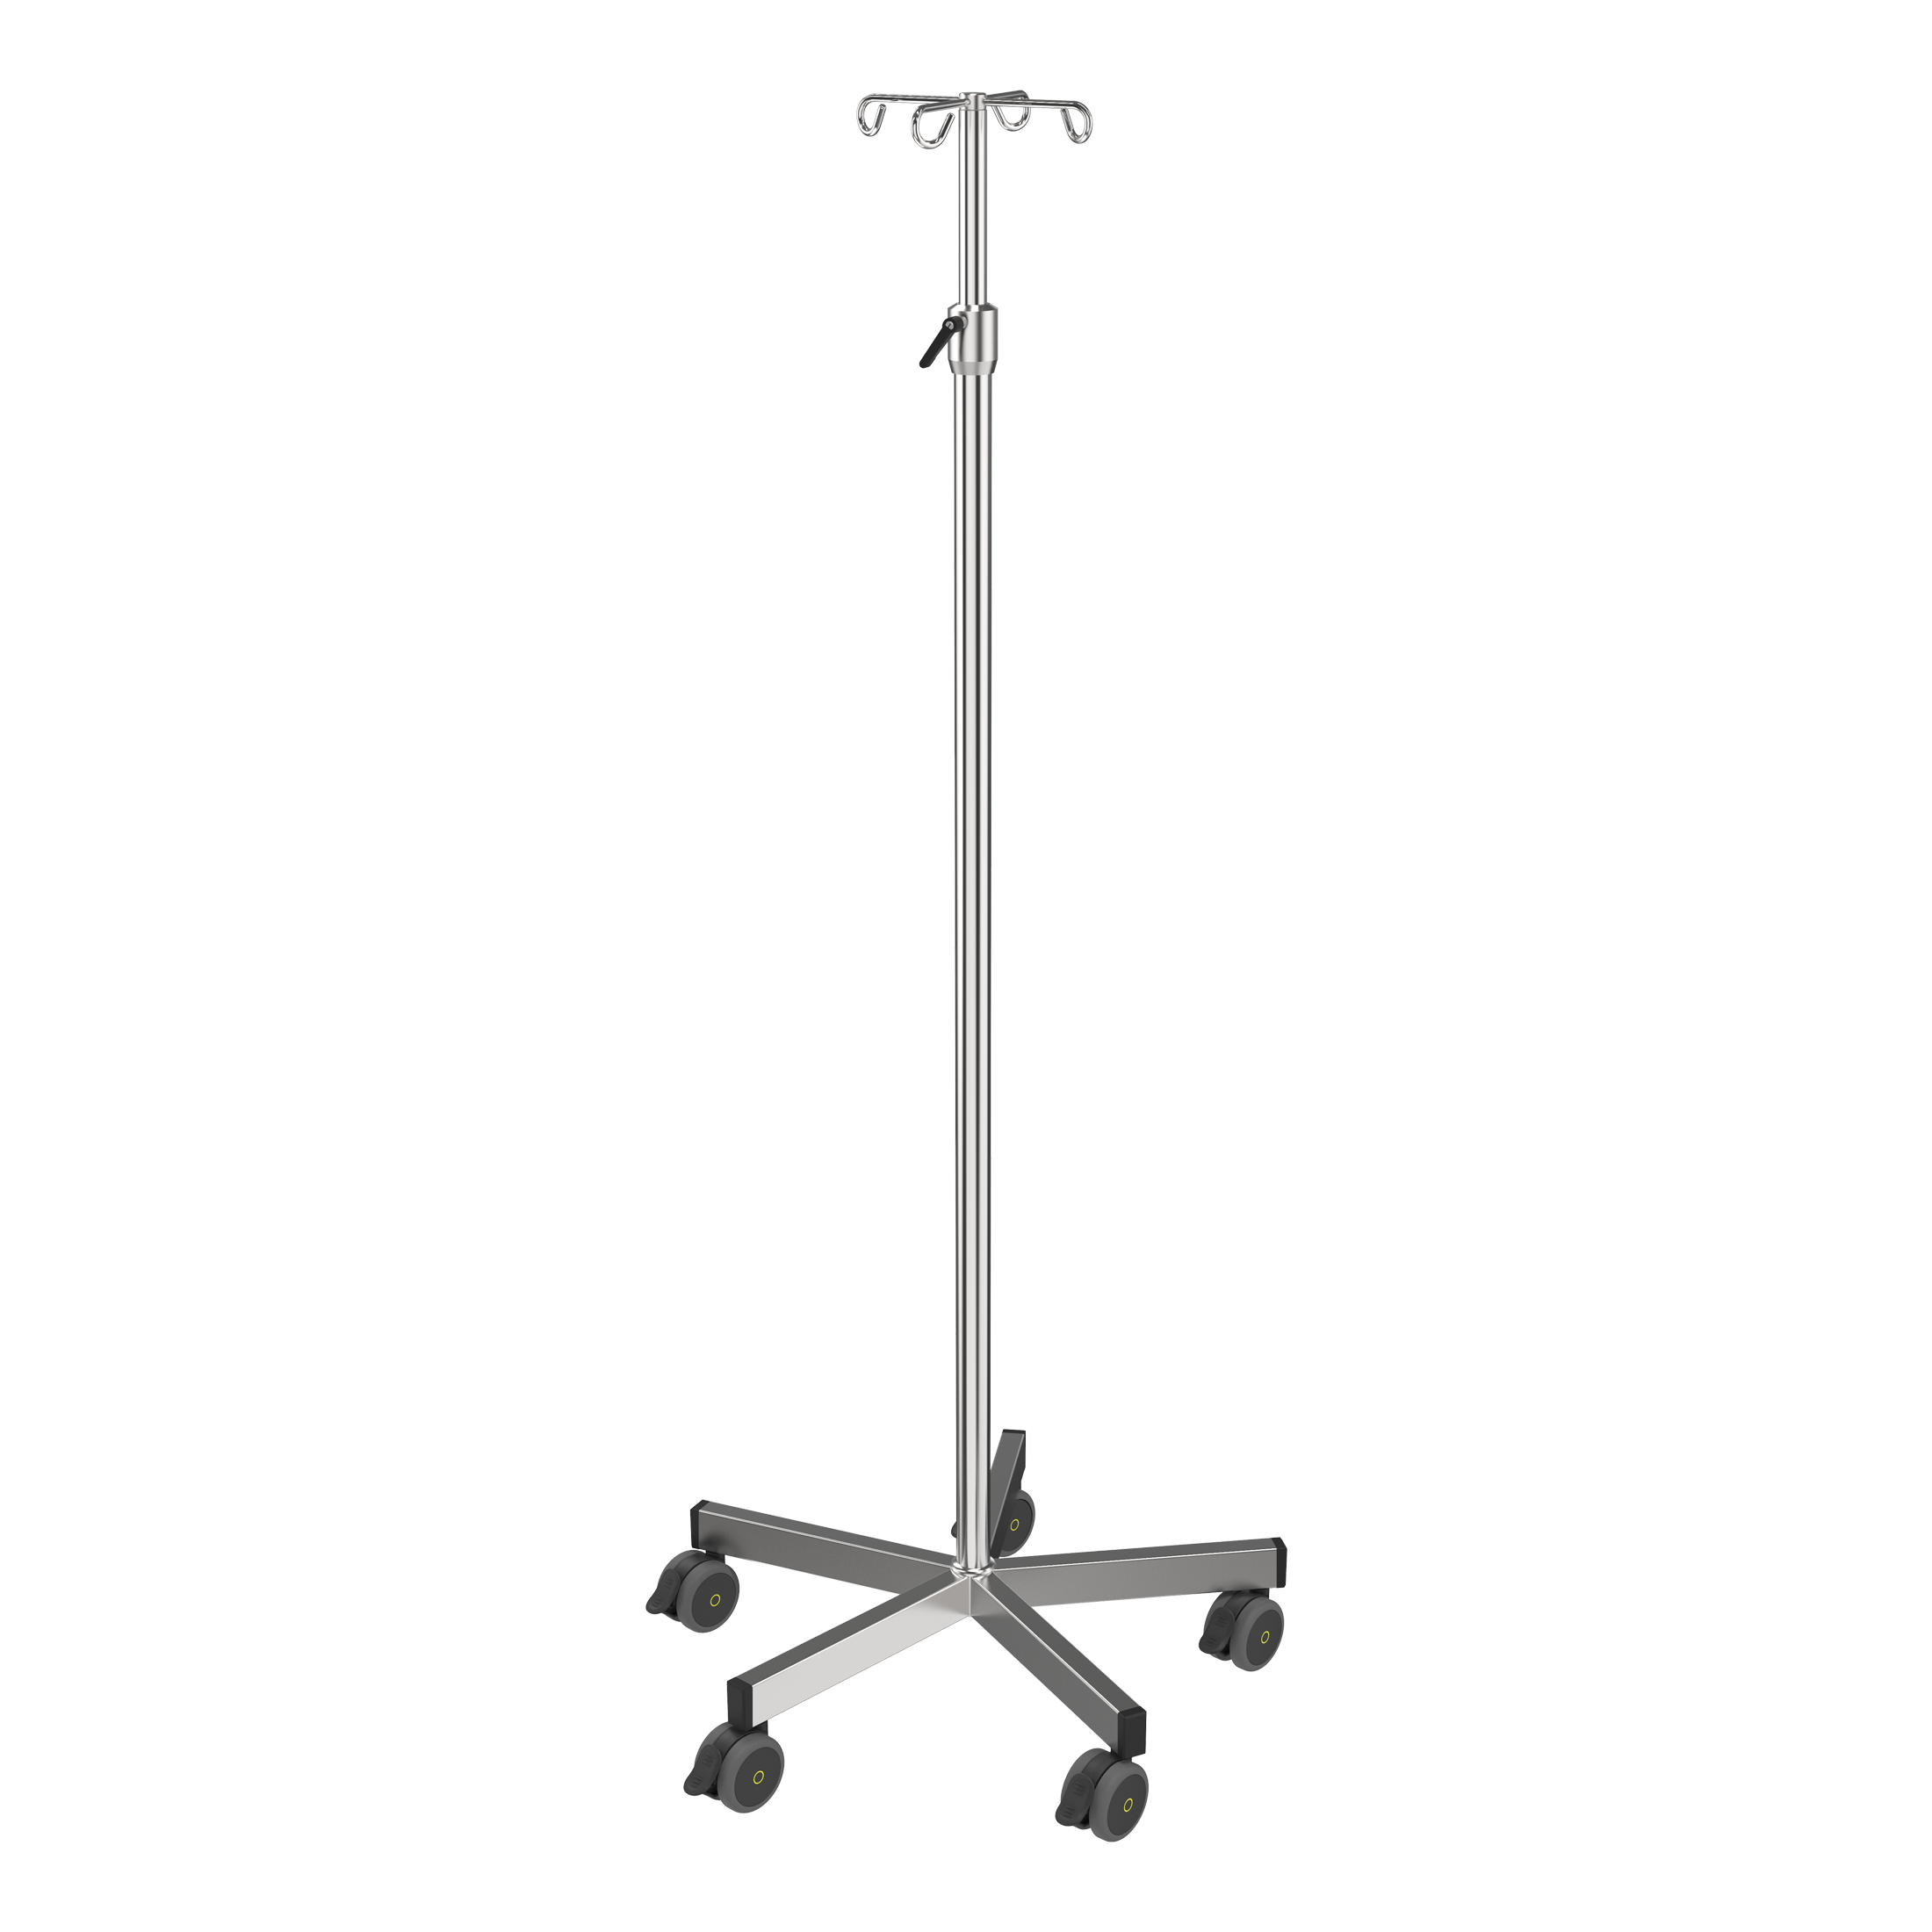 OR IV-stand with base weight